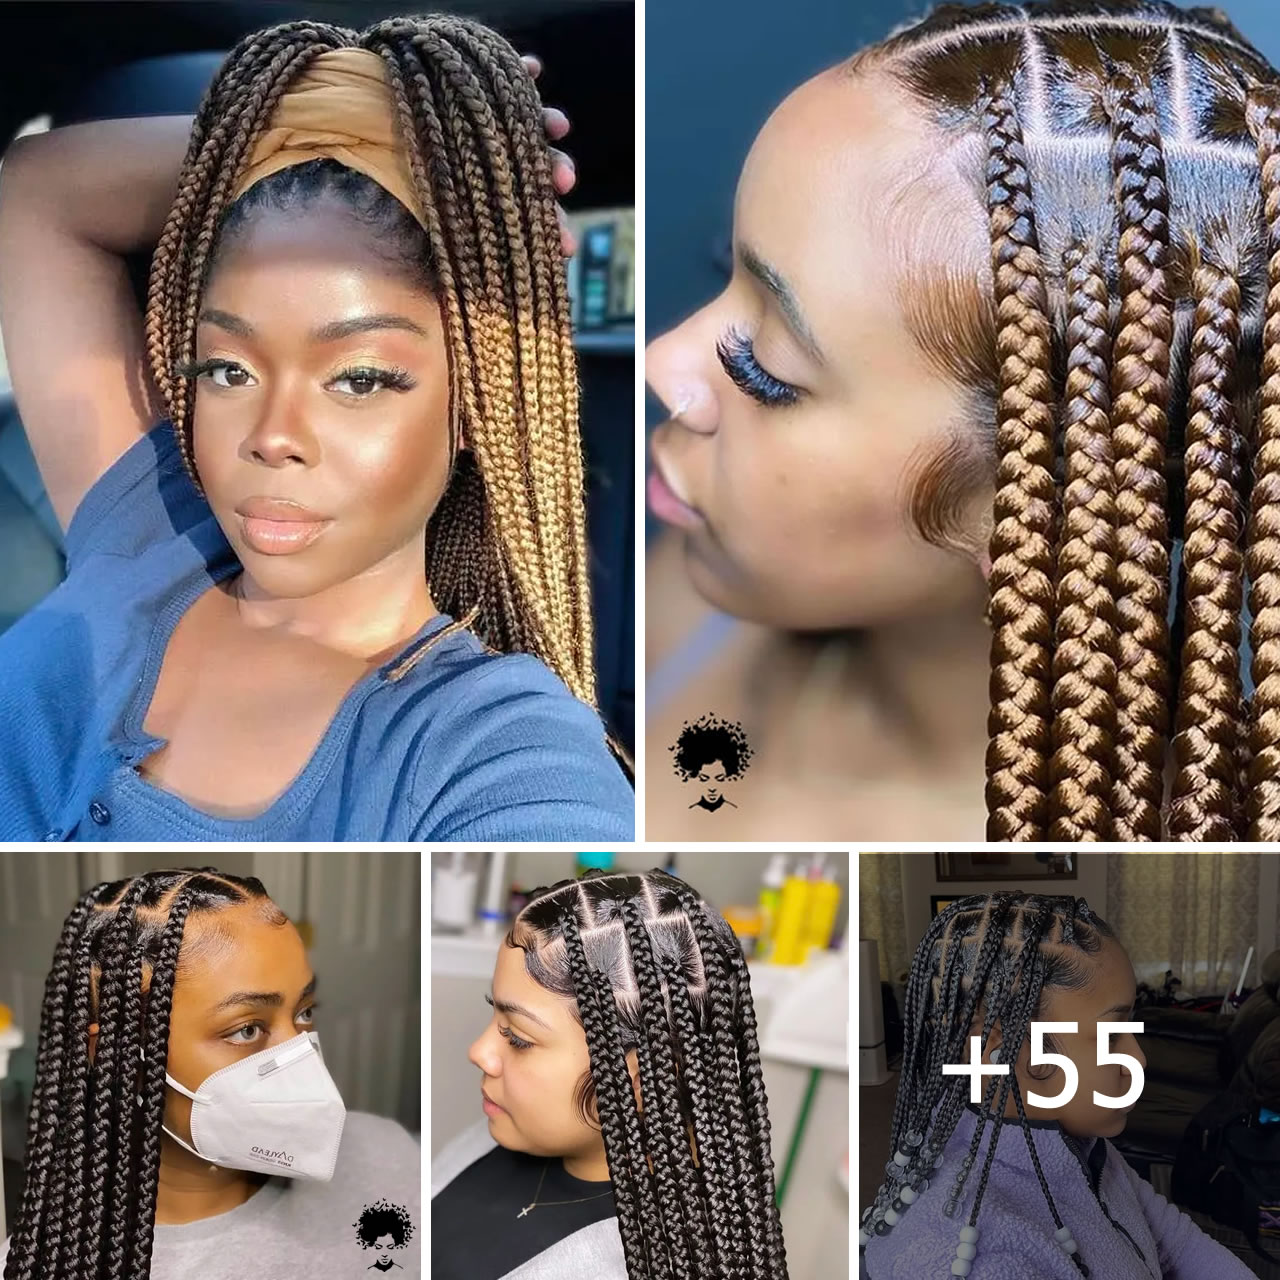 40+ Quick And Easy Black Braided Hairstyles That Make You Look Fabulous